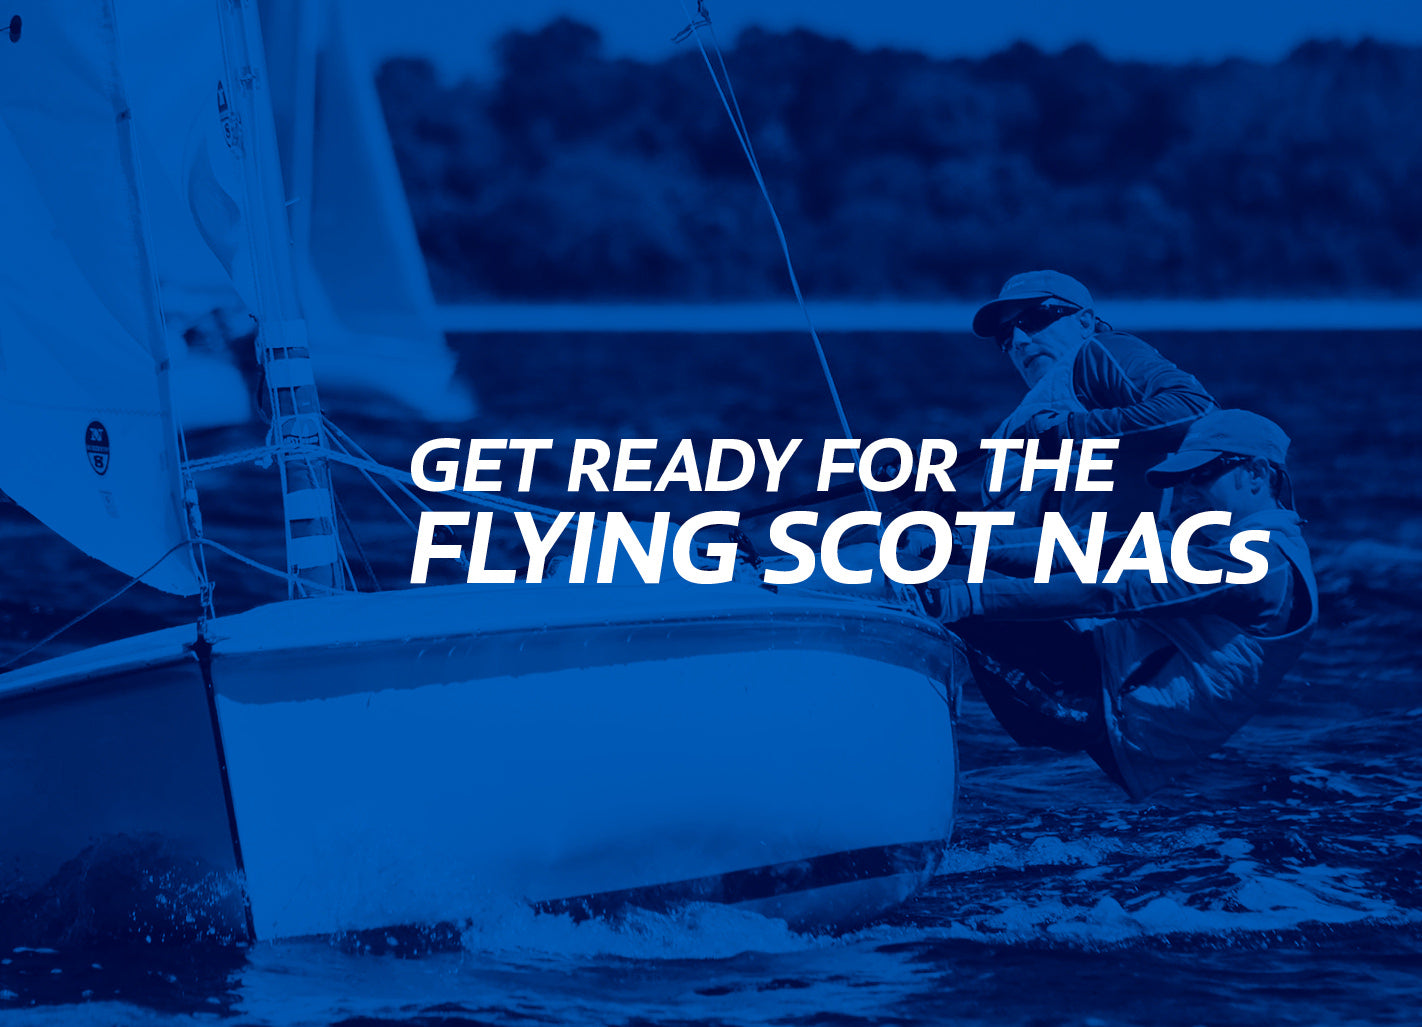 NORTH WILL GET YOU "PERKED" UP AT THE FLYING SCOT NACS